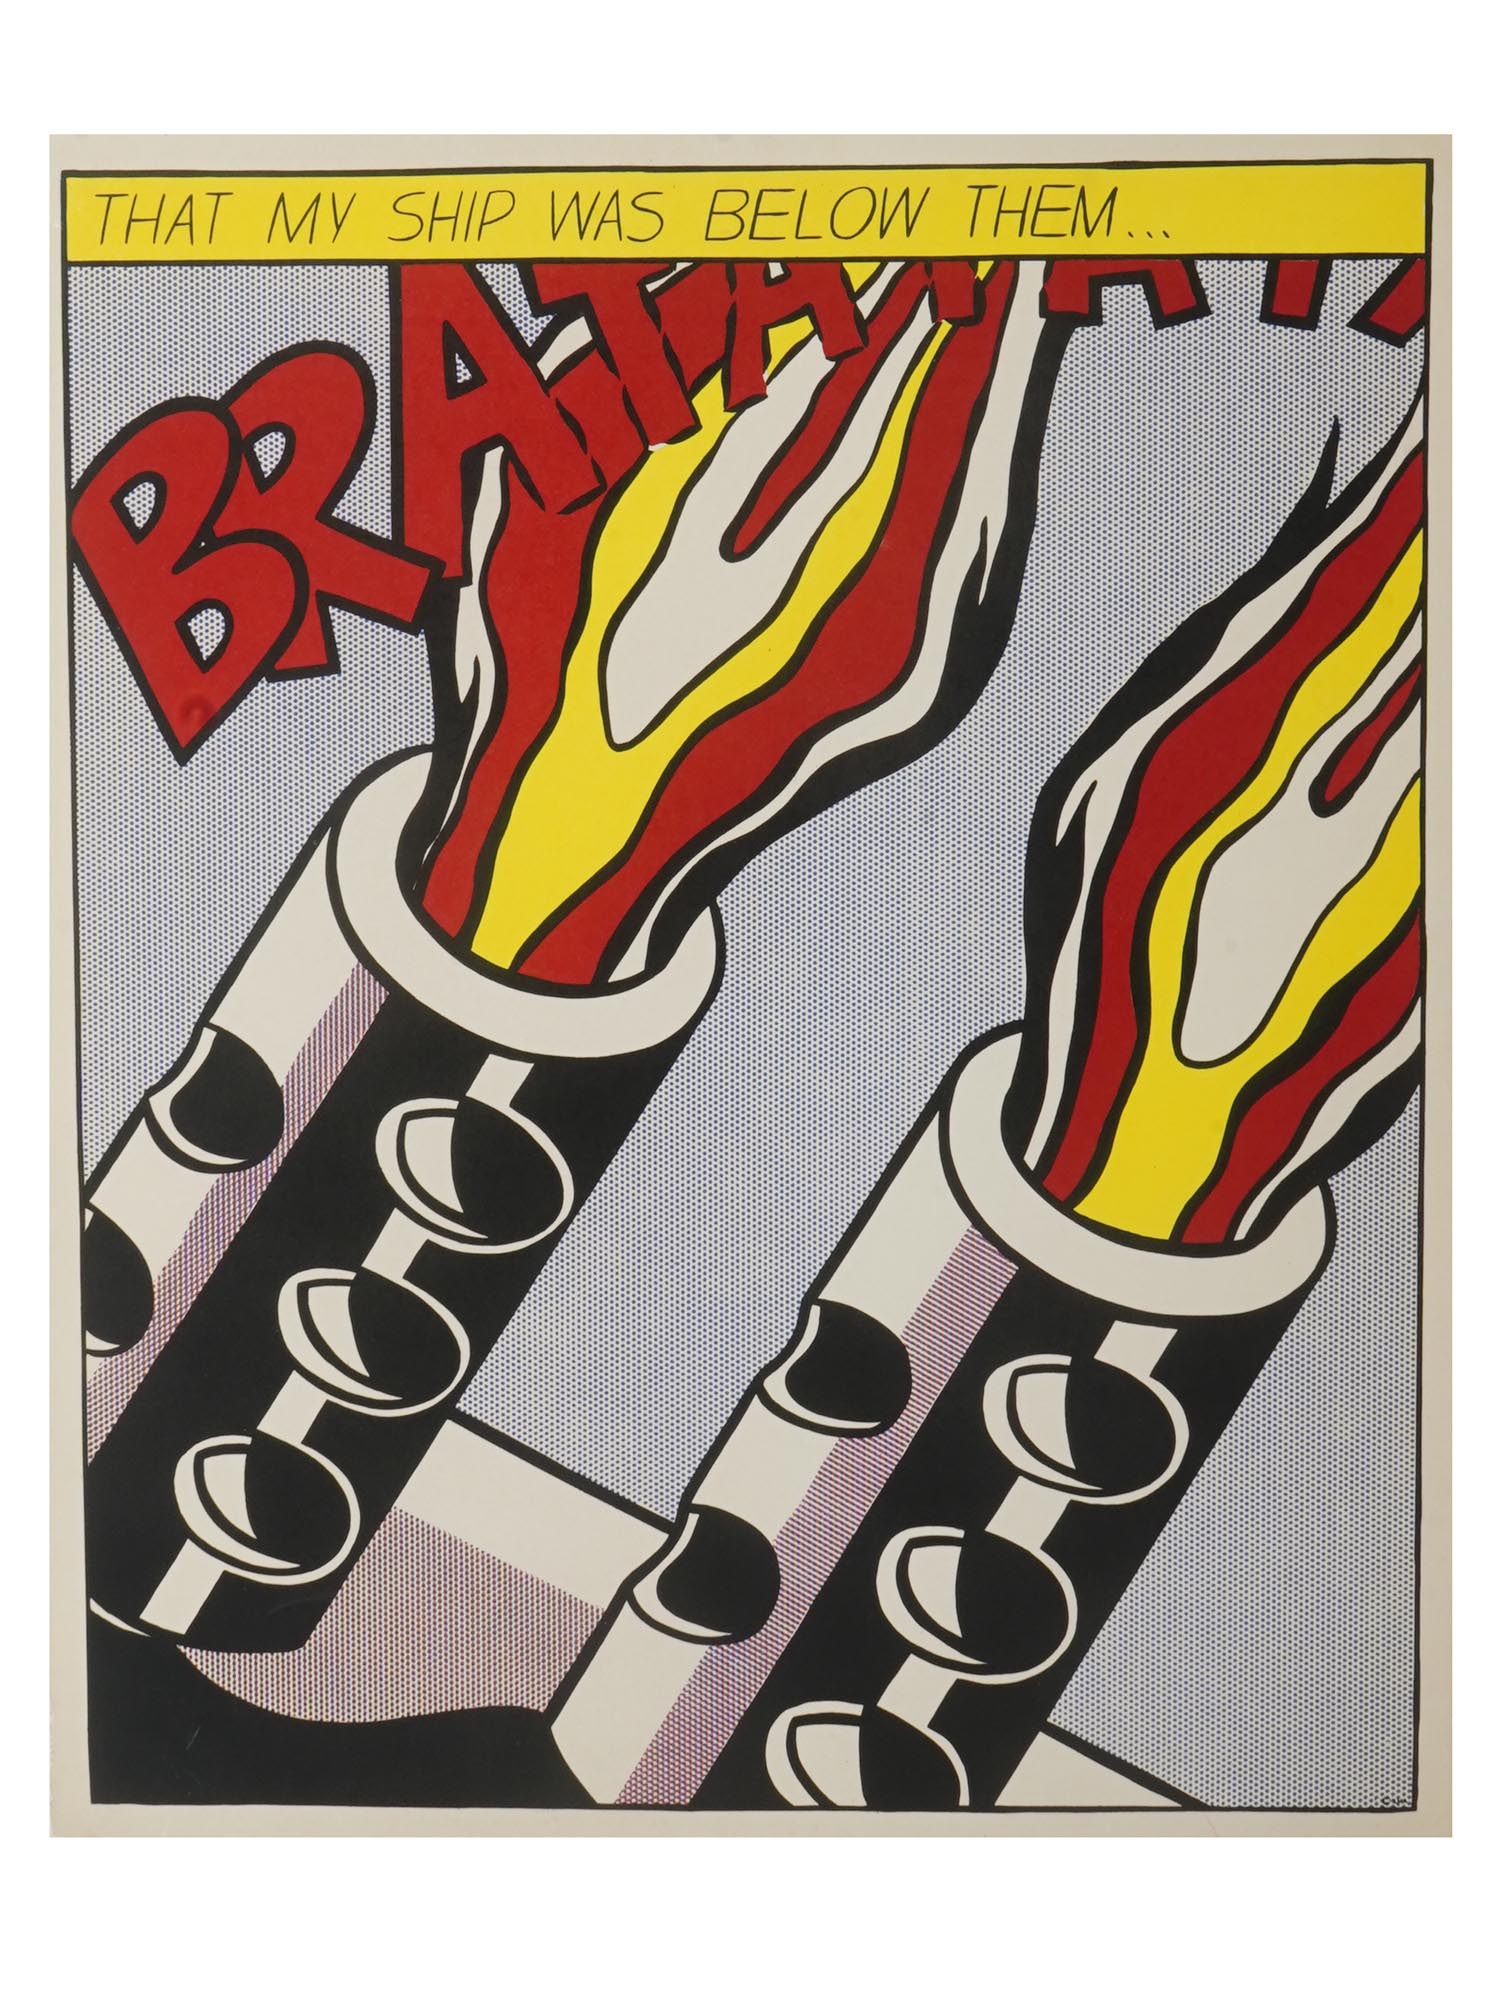 ROY LICHTENSTEIN 1967 TRIPTYCH PRINT AS I OPENED FIRE PIC-1